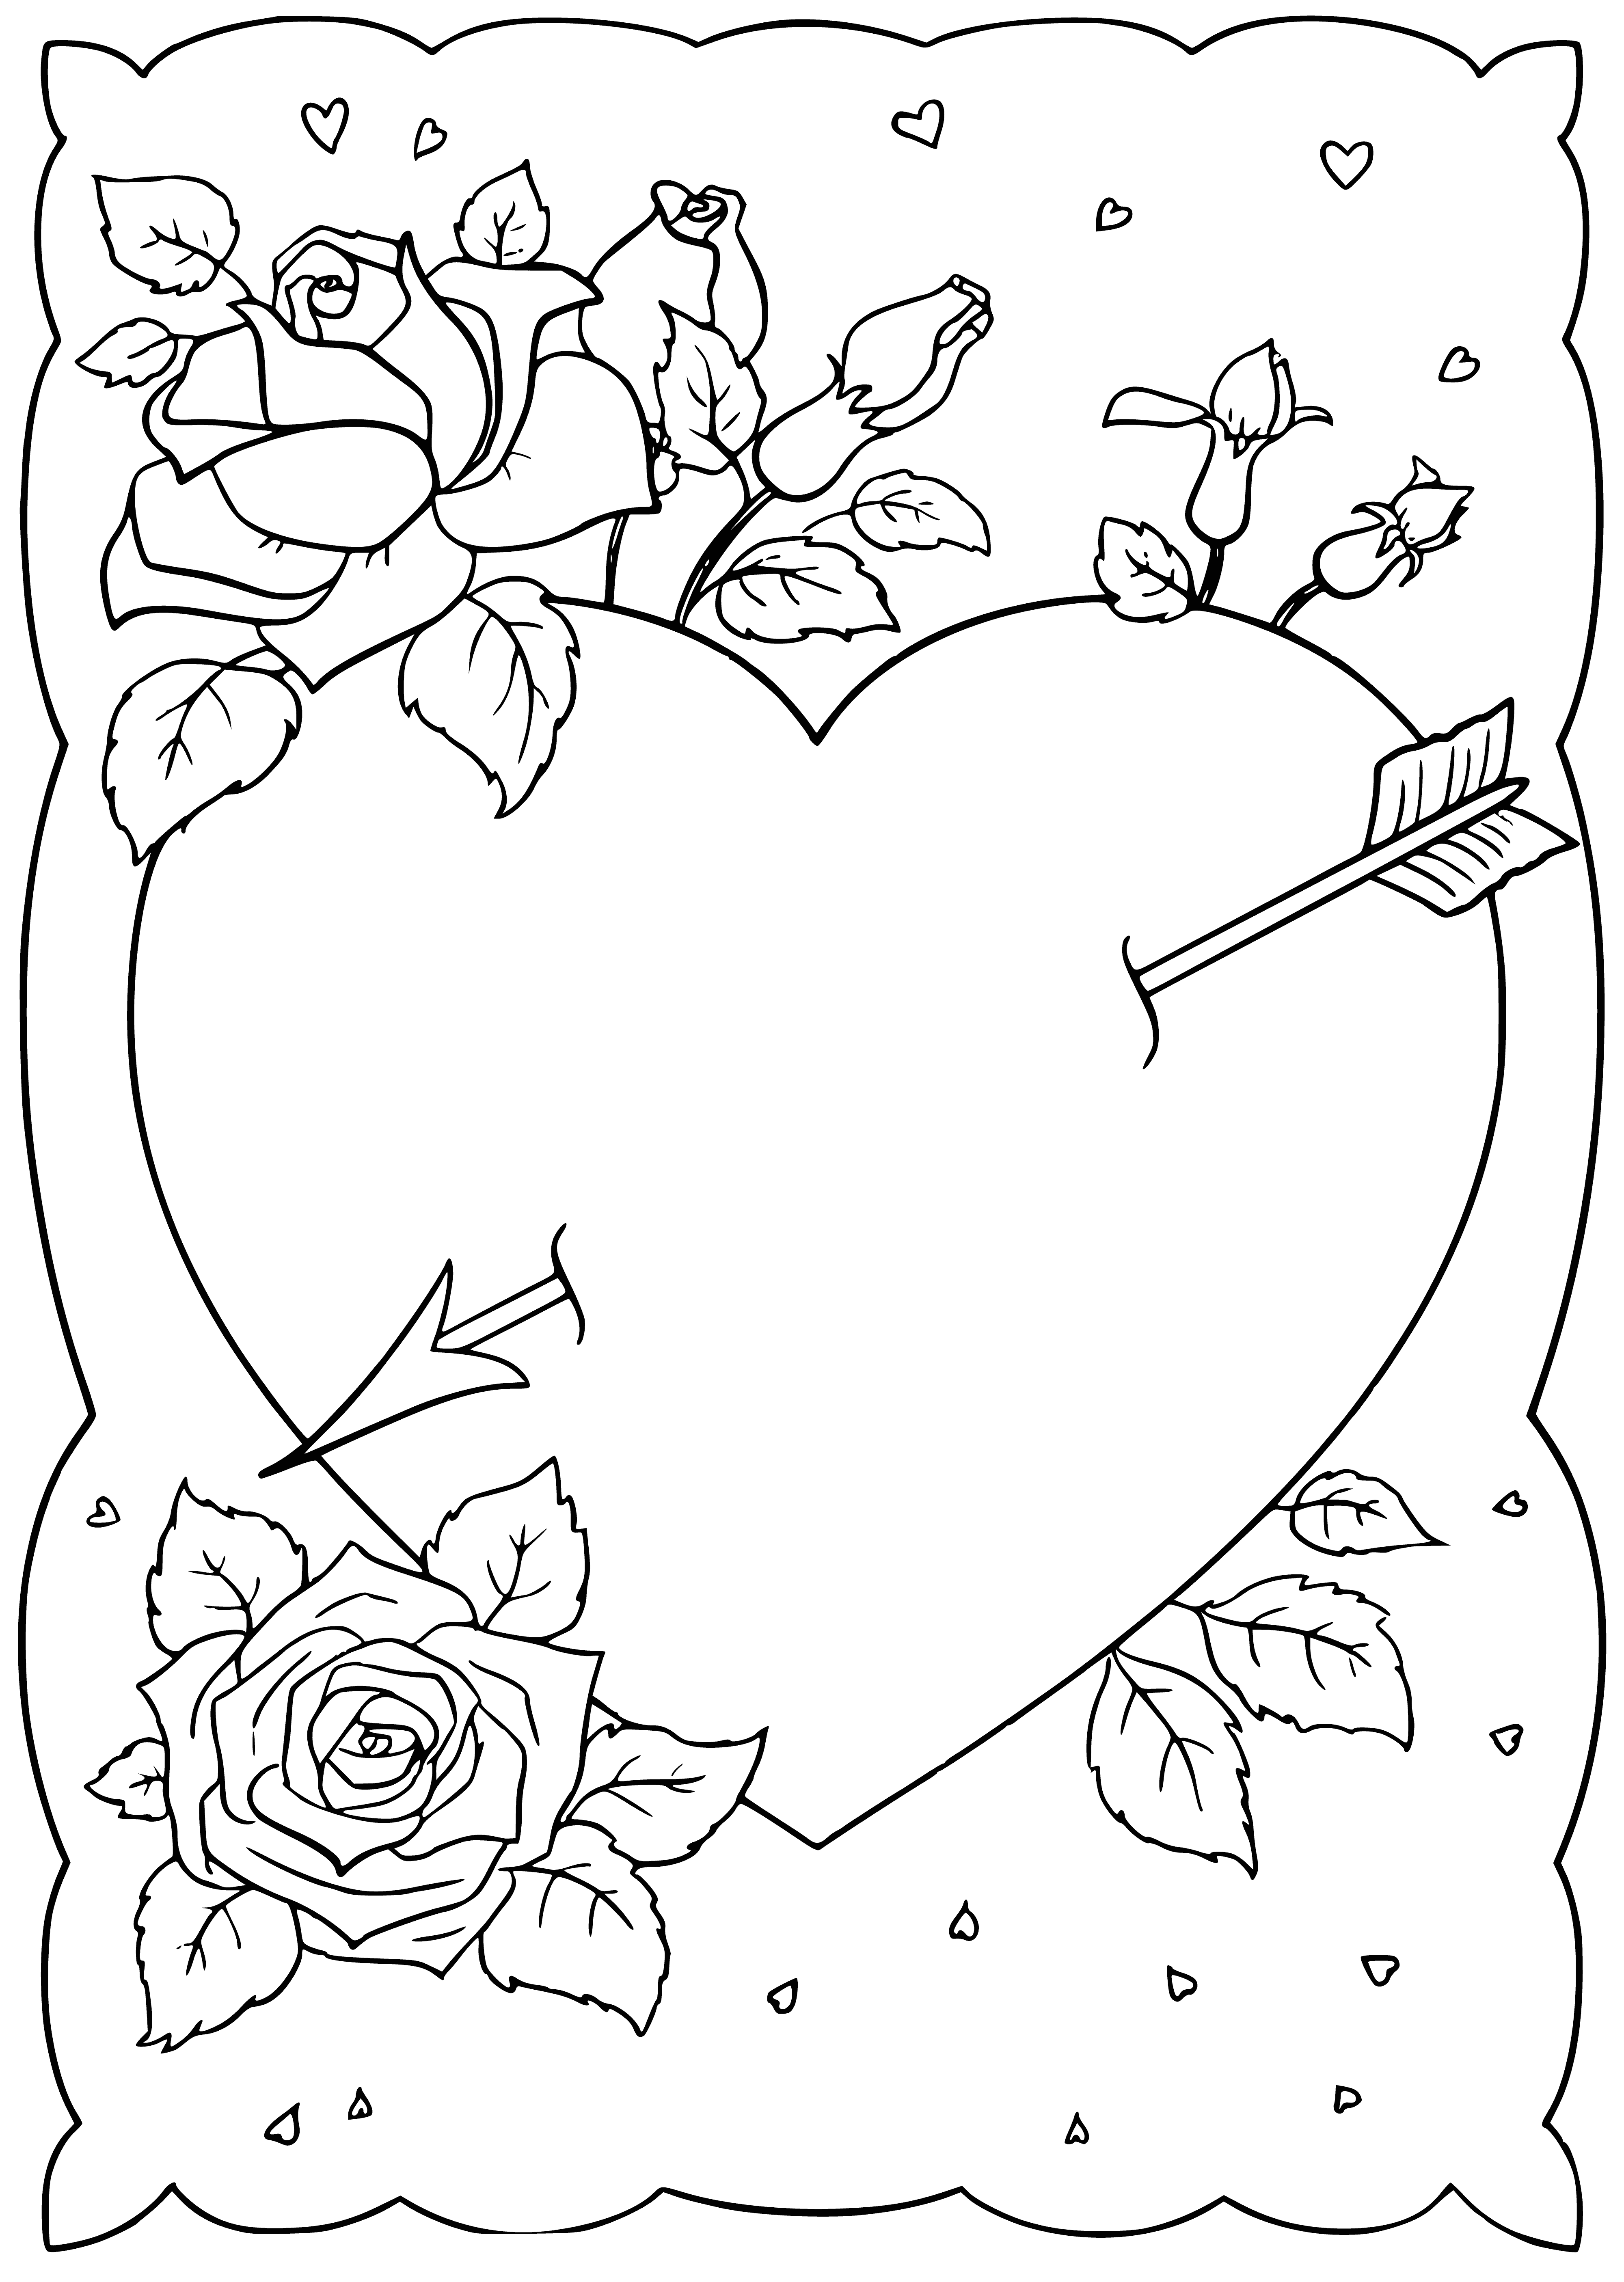 coloring page: Two lovers embracing in a bright red heart. Blonde woman in white dress, brown-haired man in blue shirt. Arms around each other in deep embrace.